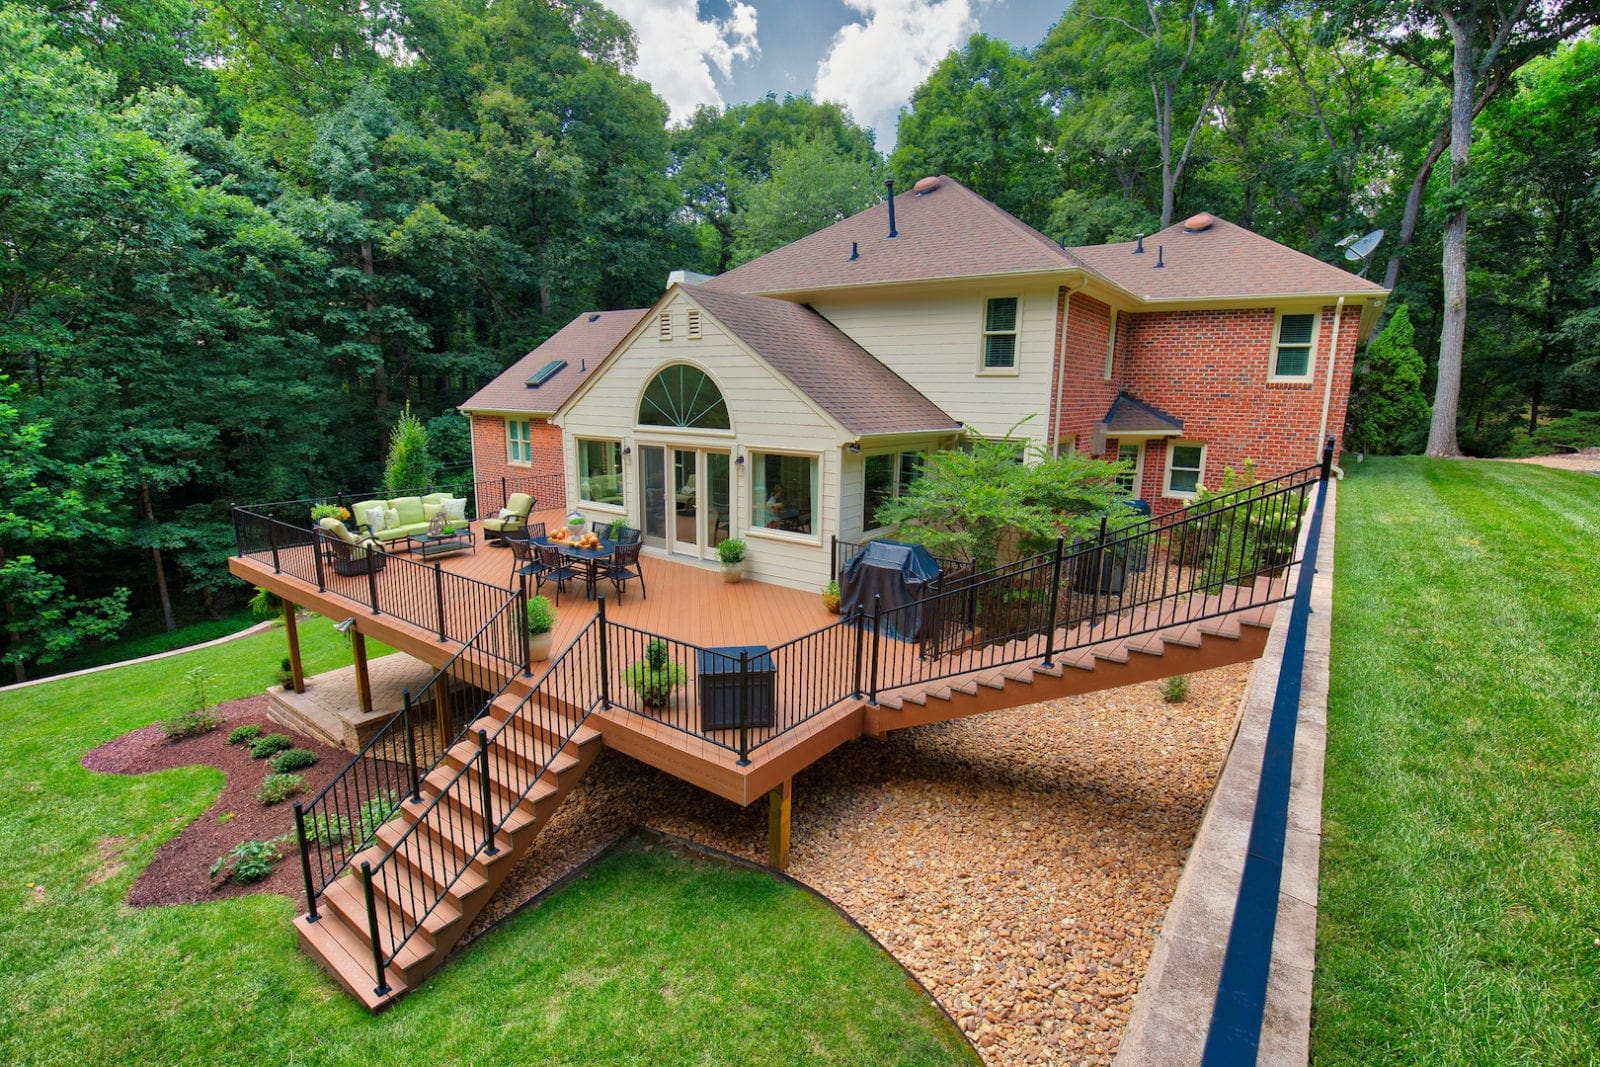 A magnificent wooden deck, expertly designed and built by Deck Creations.